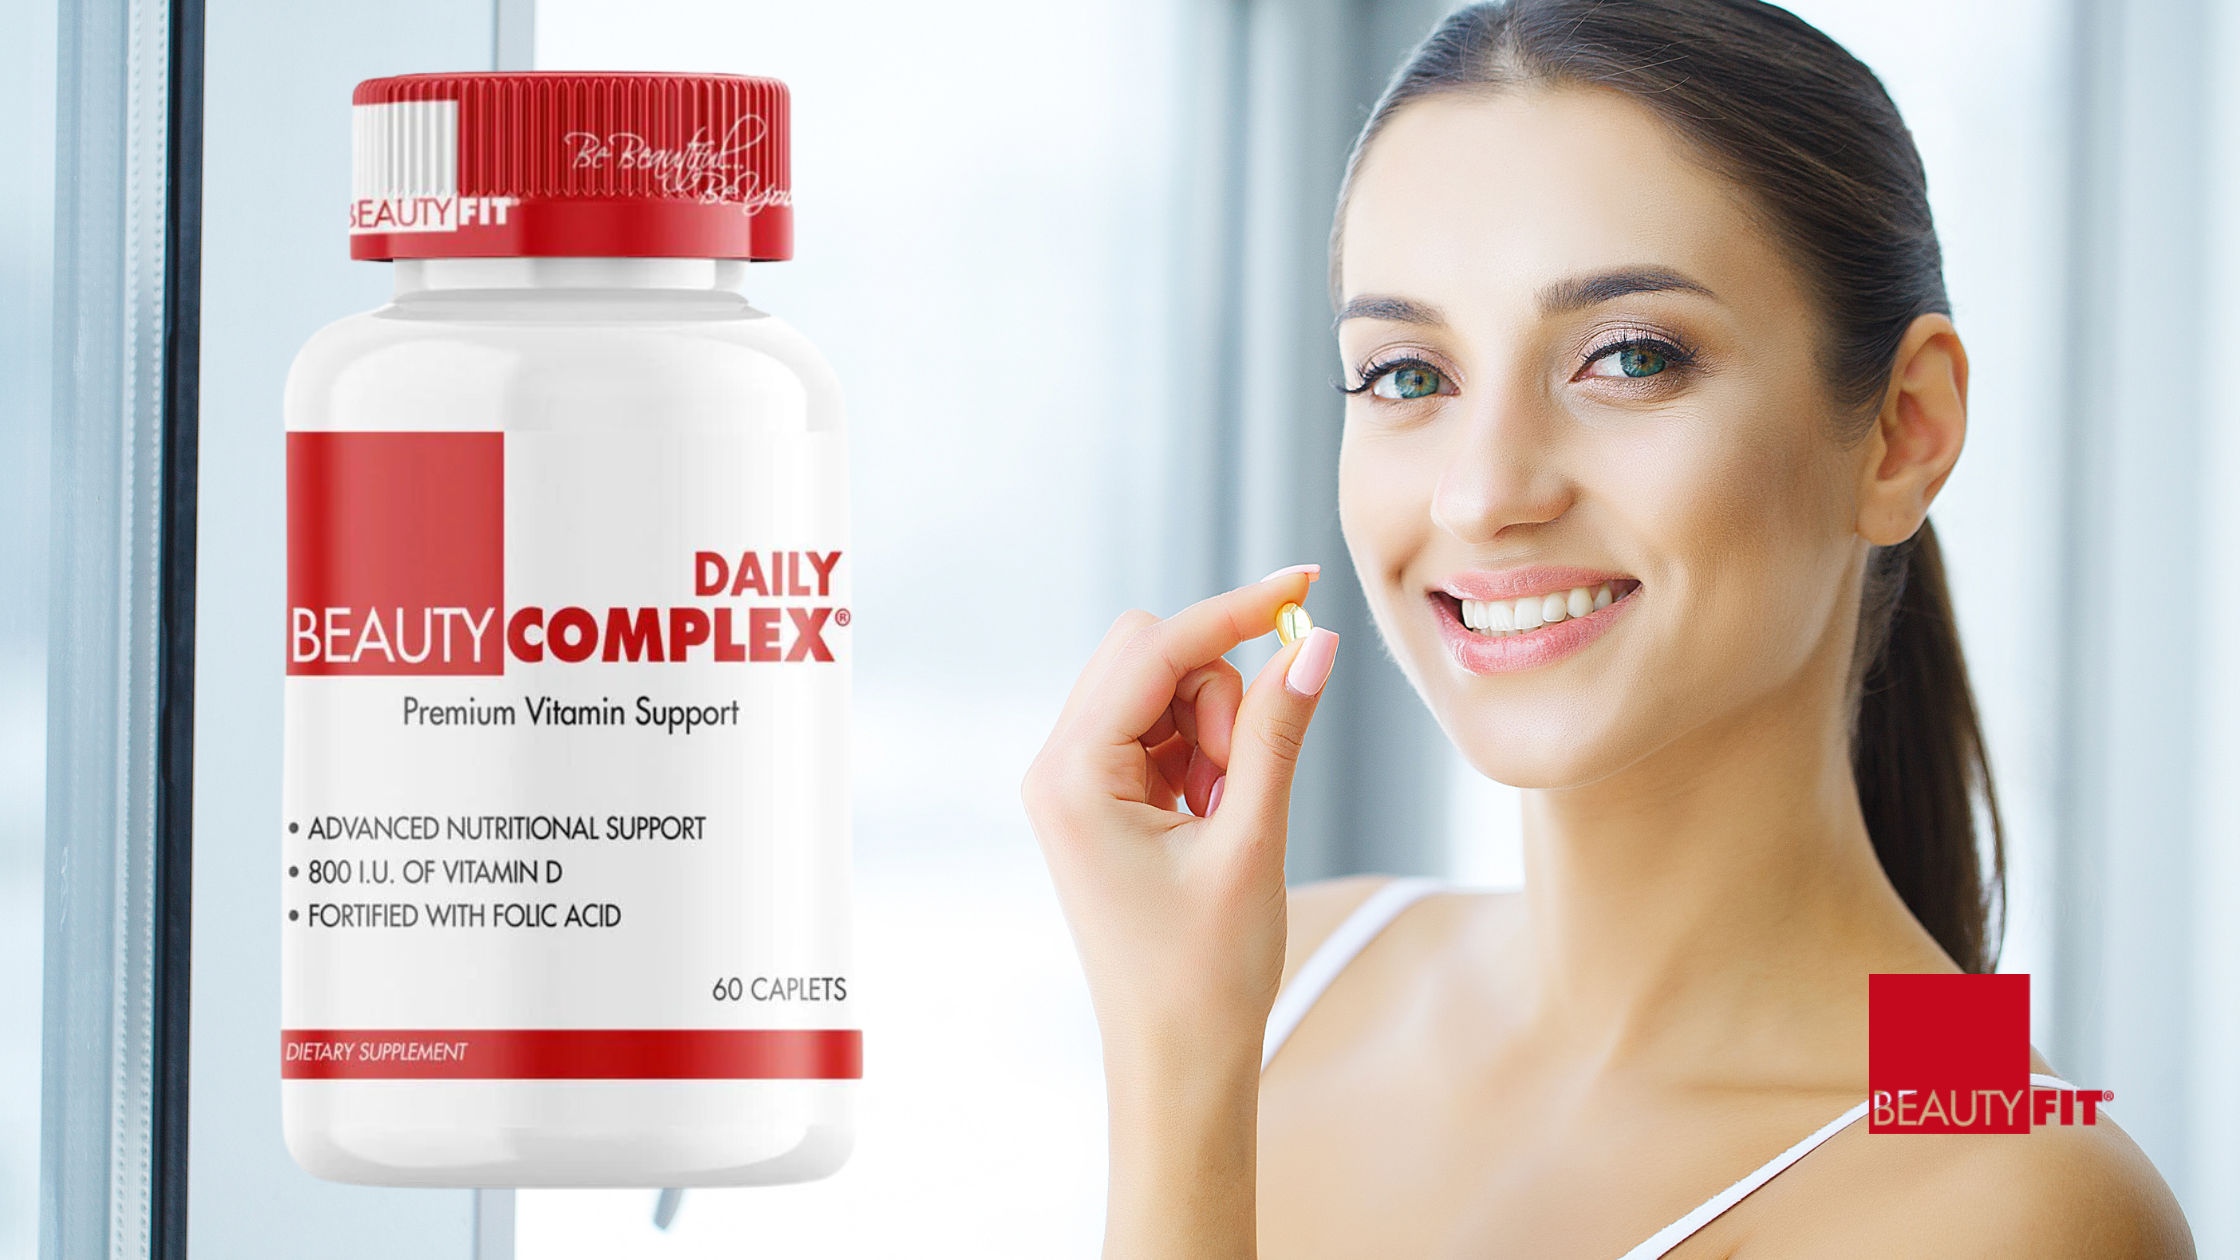 Empower Your Well-Being with Health Supplements from BeautyFit